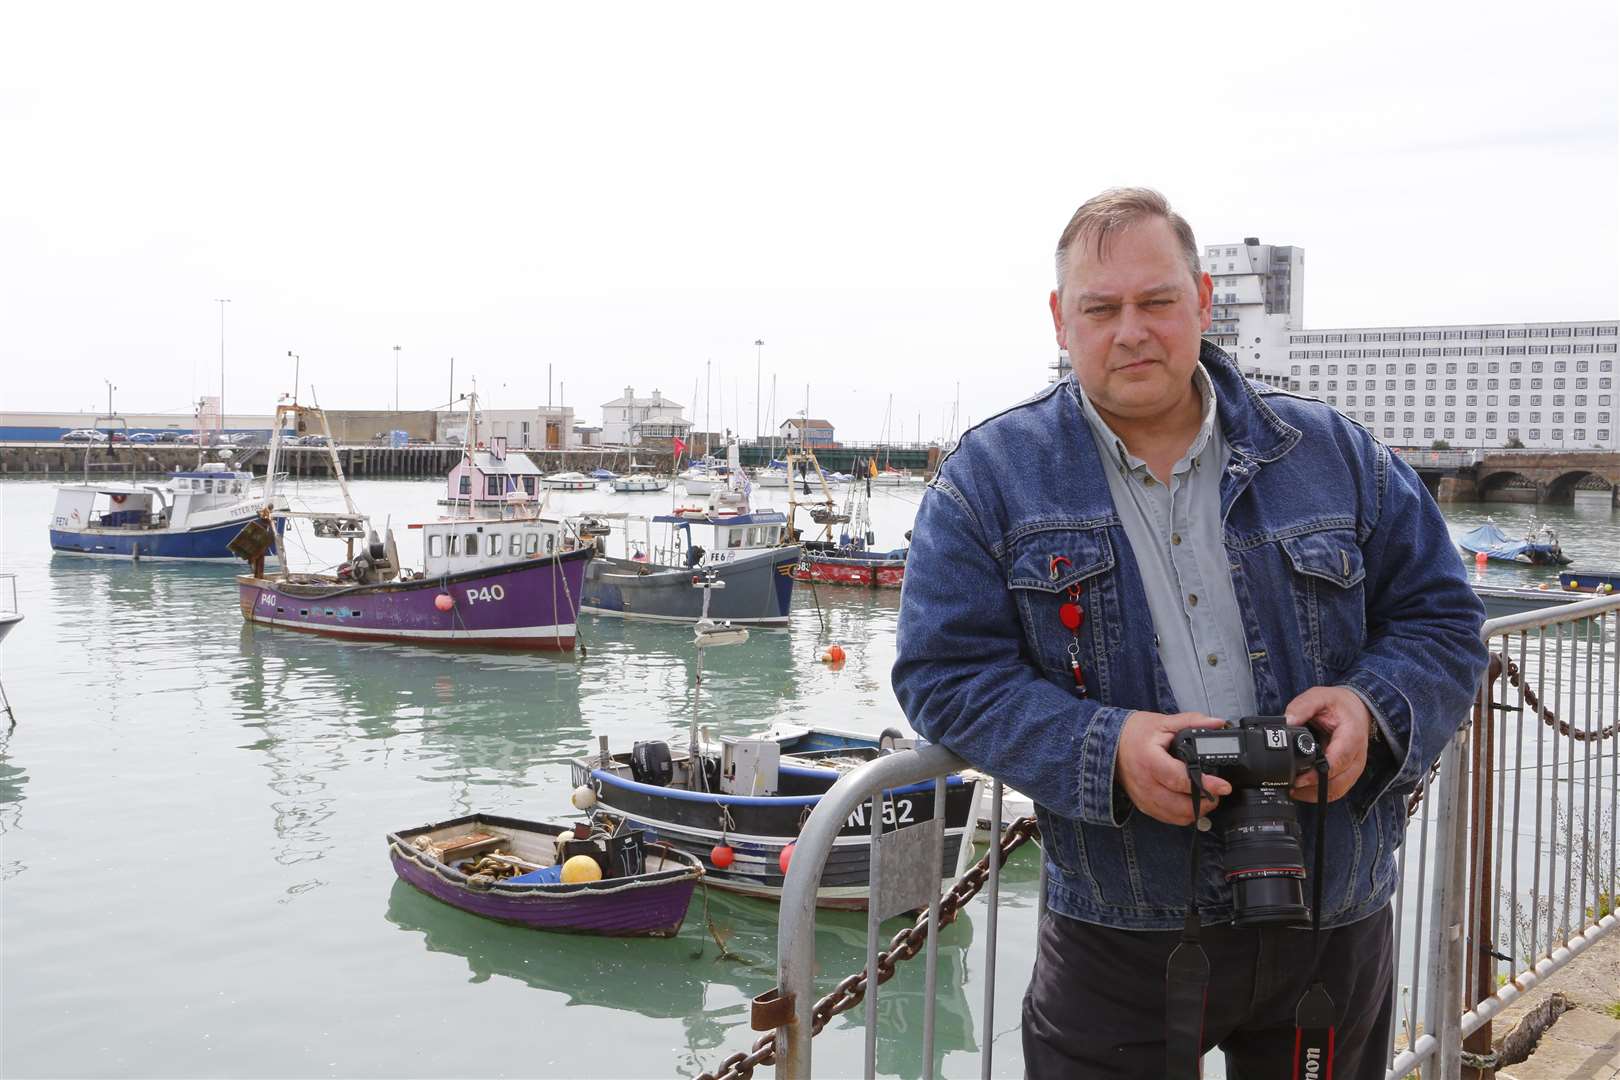 Journalist Nigel Pivaro, who previously played Terry Duckworth in Coronation Street, in Folkestone to interview fisherman about their hopes after Brexit. Picture: Andy Jones